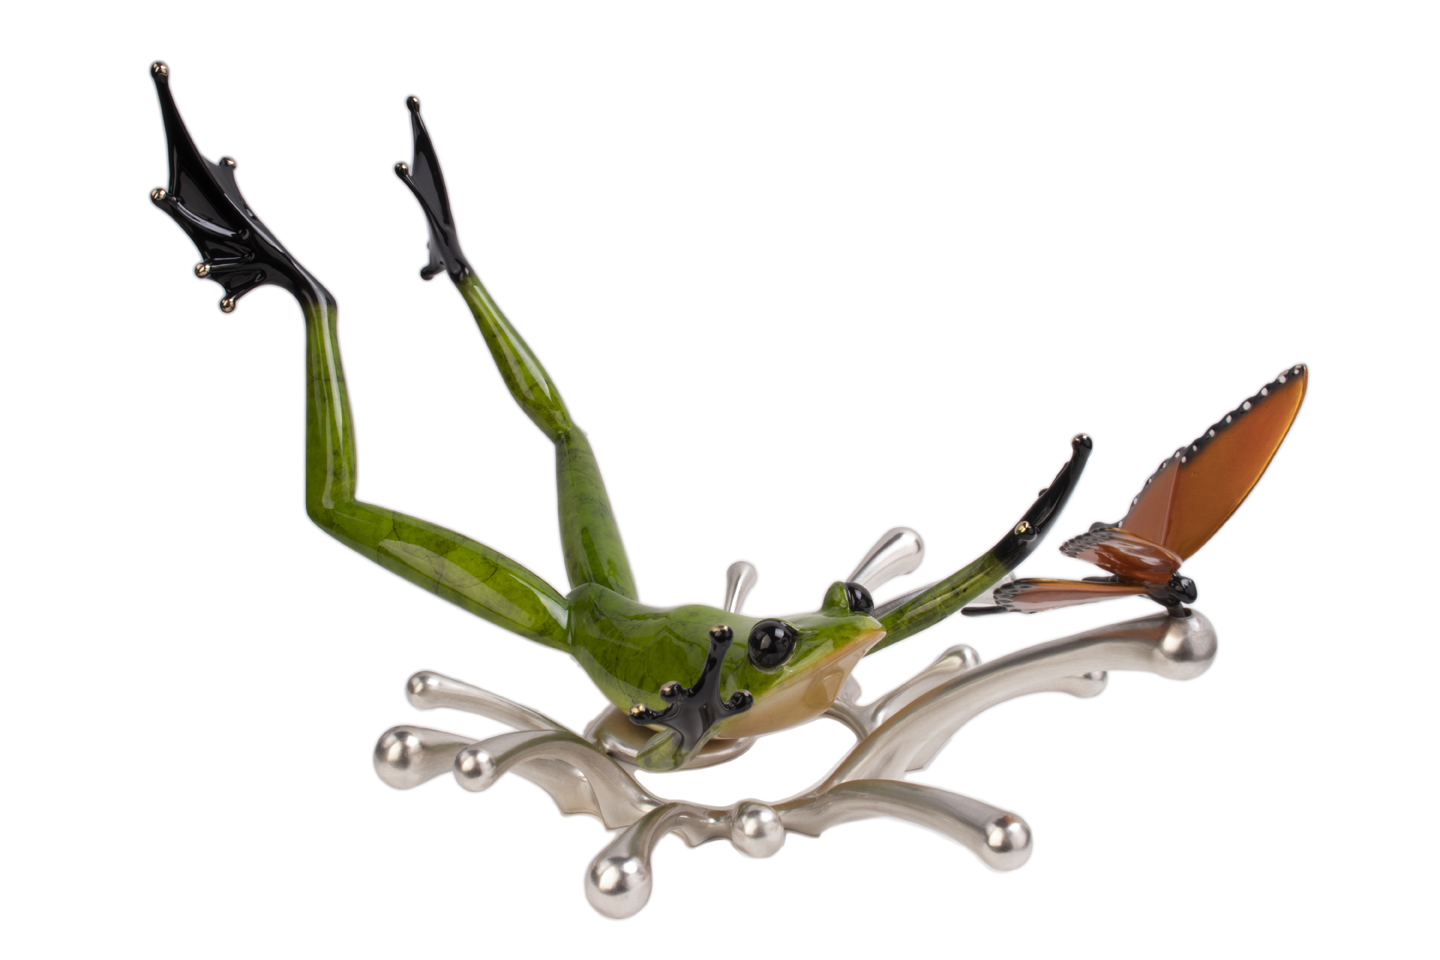 Signed, limited edition frog sculpture